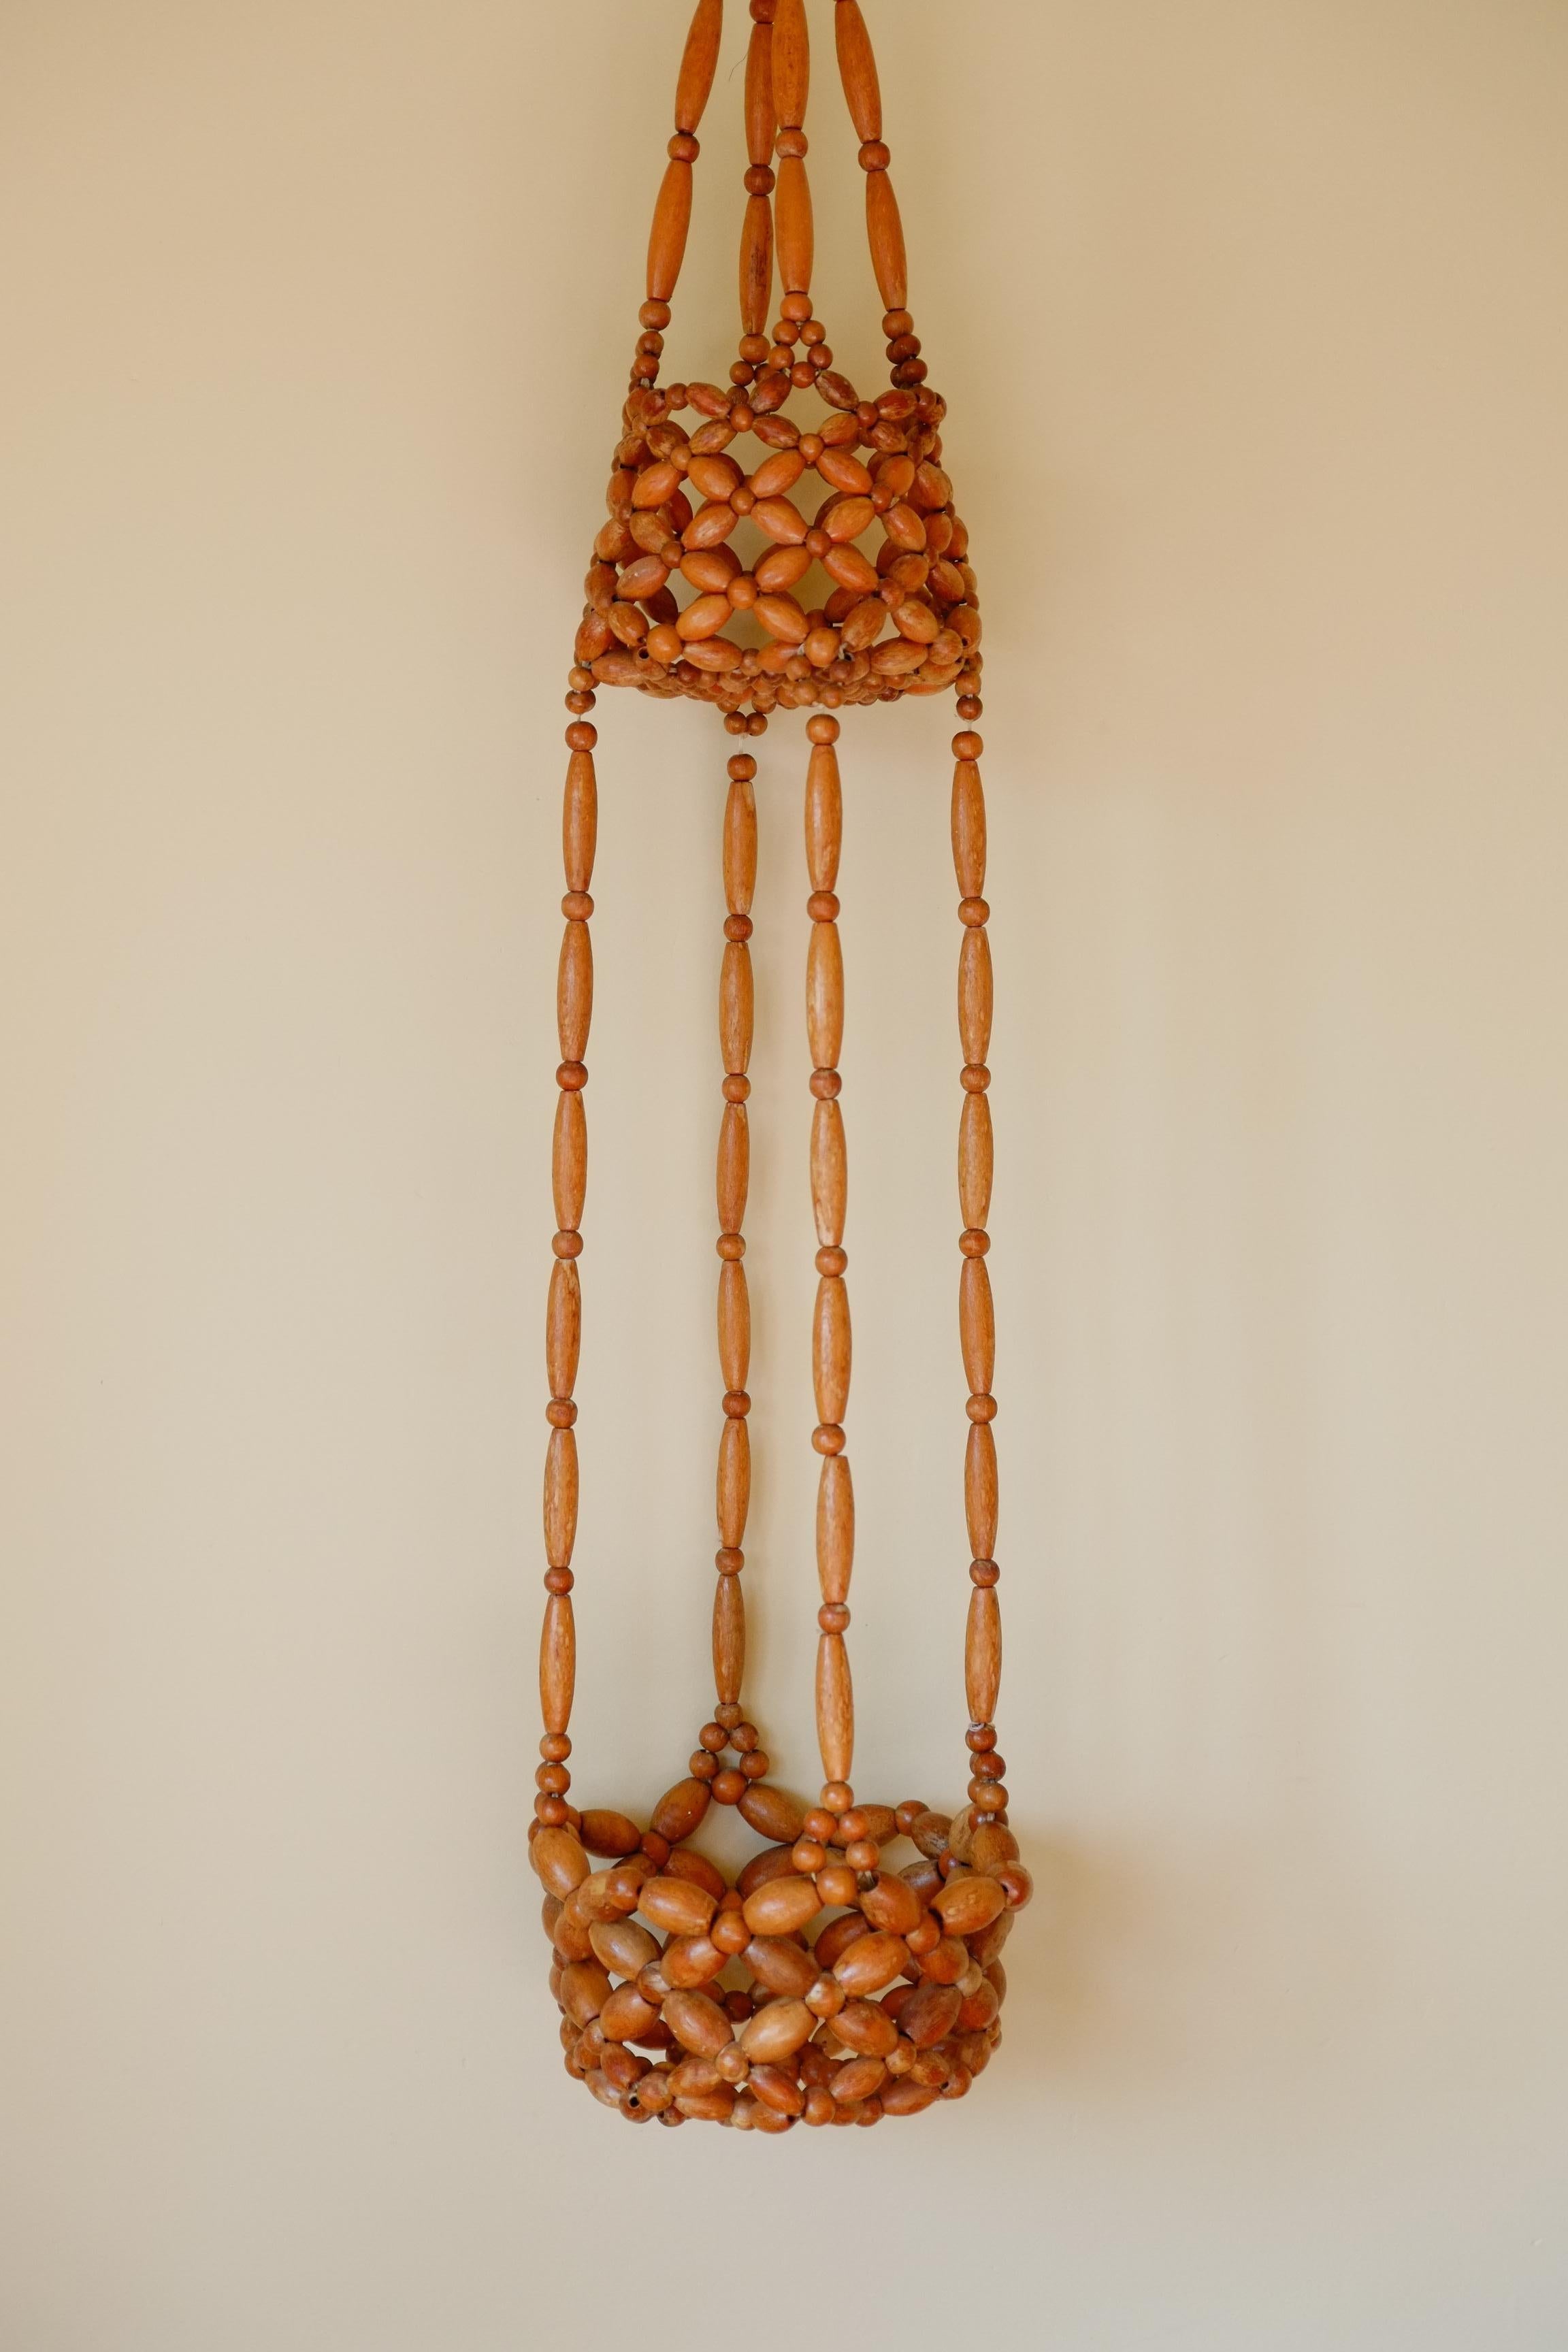 English Rare Large Midcentury Beaded Plant Hanger / Hanging Planter For Sale